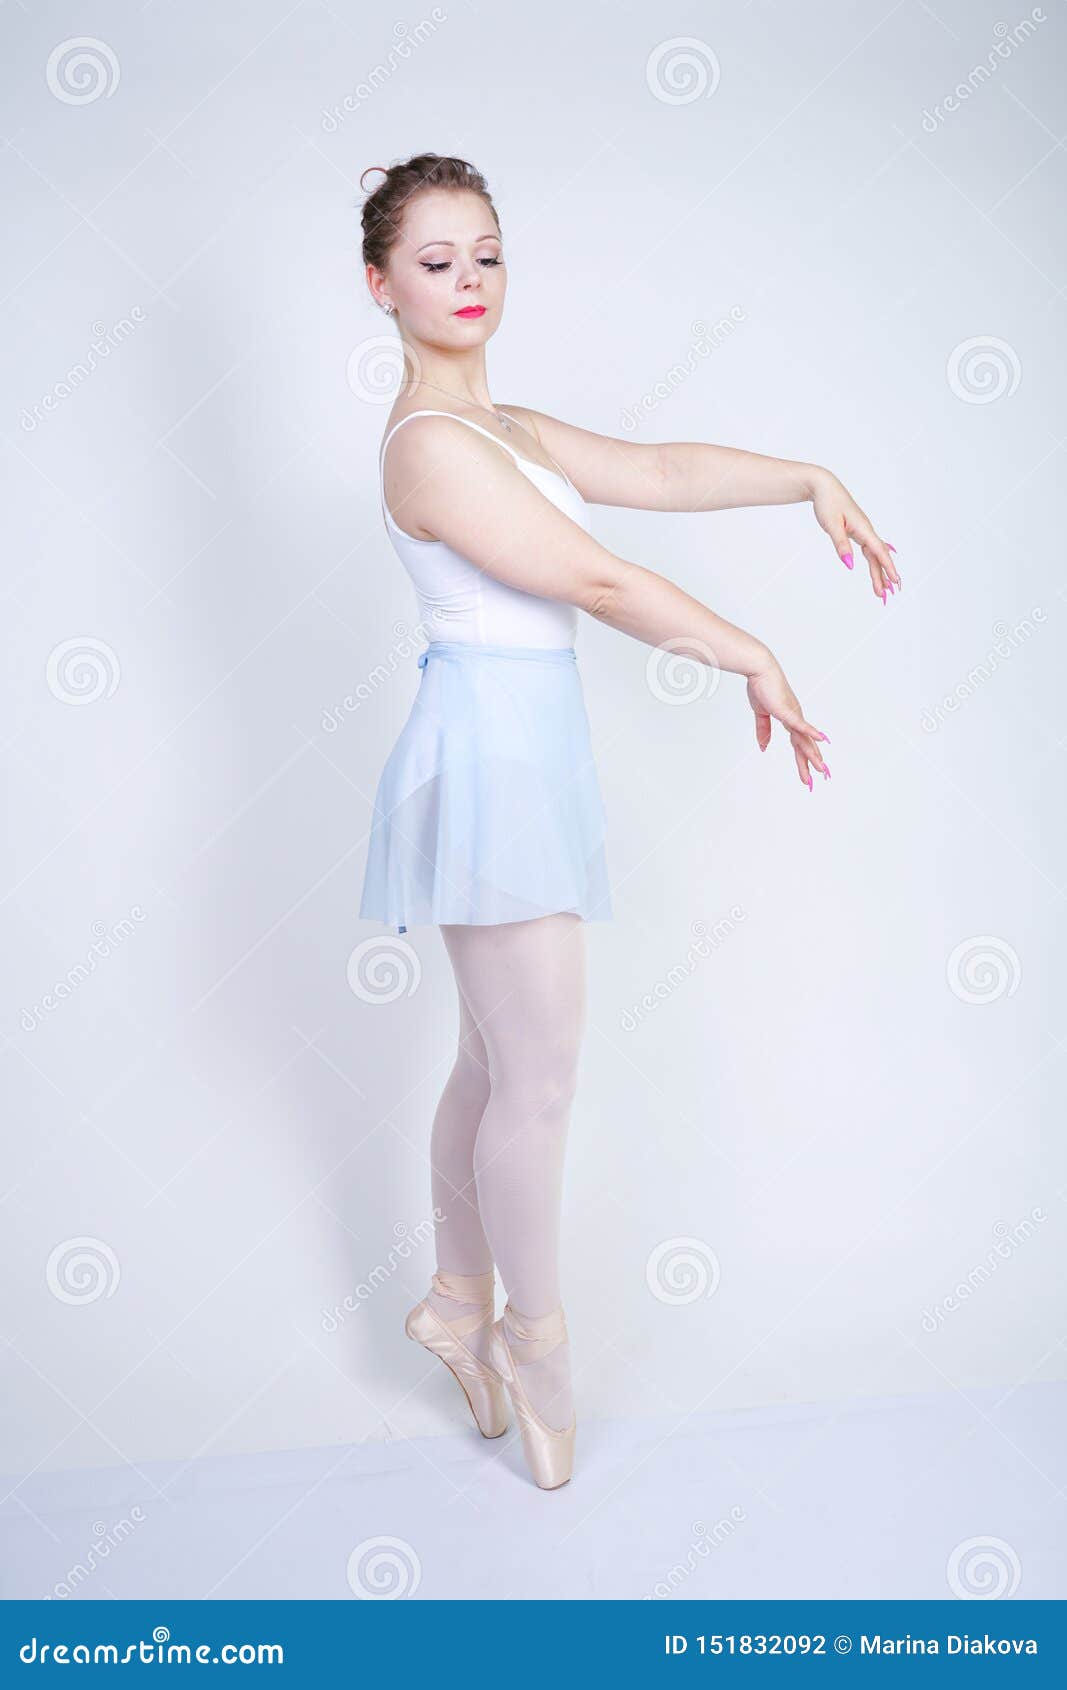 Cute Caucasian Girl in Ballet Clothes Learning To Be Ballerina on a White Background in the Studio. Plus Size Woman Dreams Stock Photo - Image of face, beautiful: